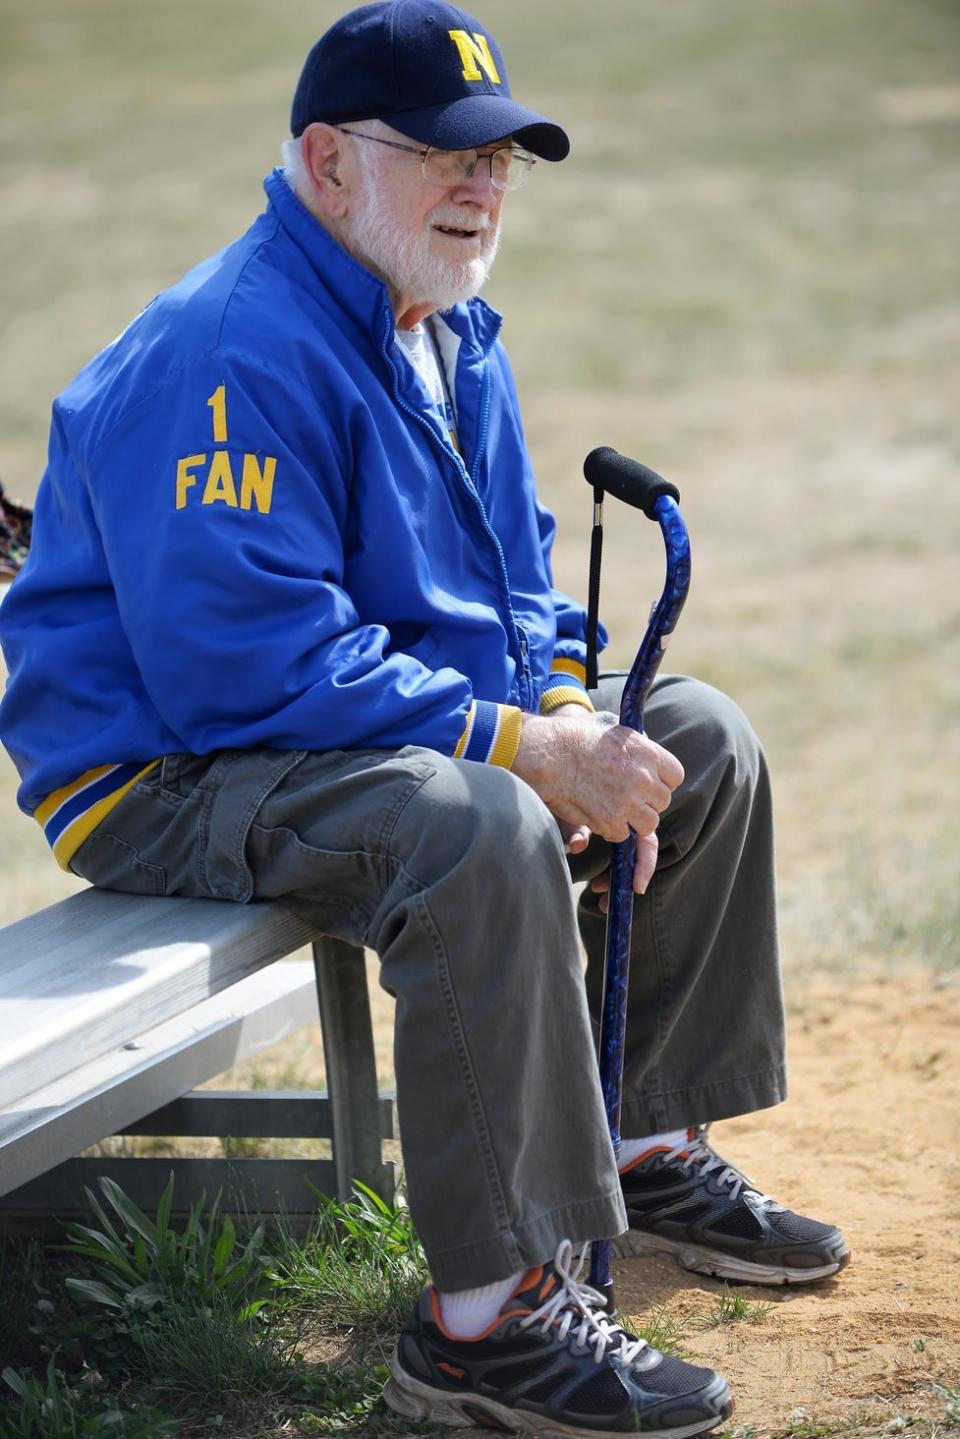 Charles 'Pop' Fellenbaum will be inducted into the Buena Regional Athletic Hall of Fame on Nov. 26.